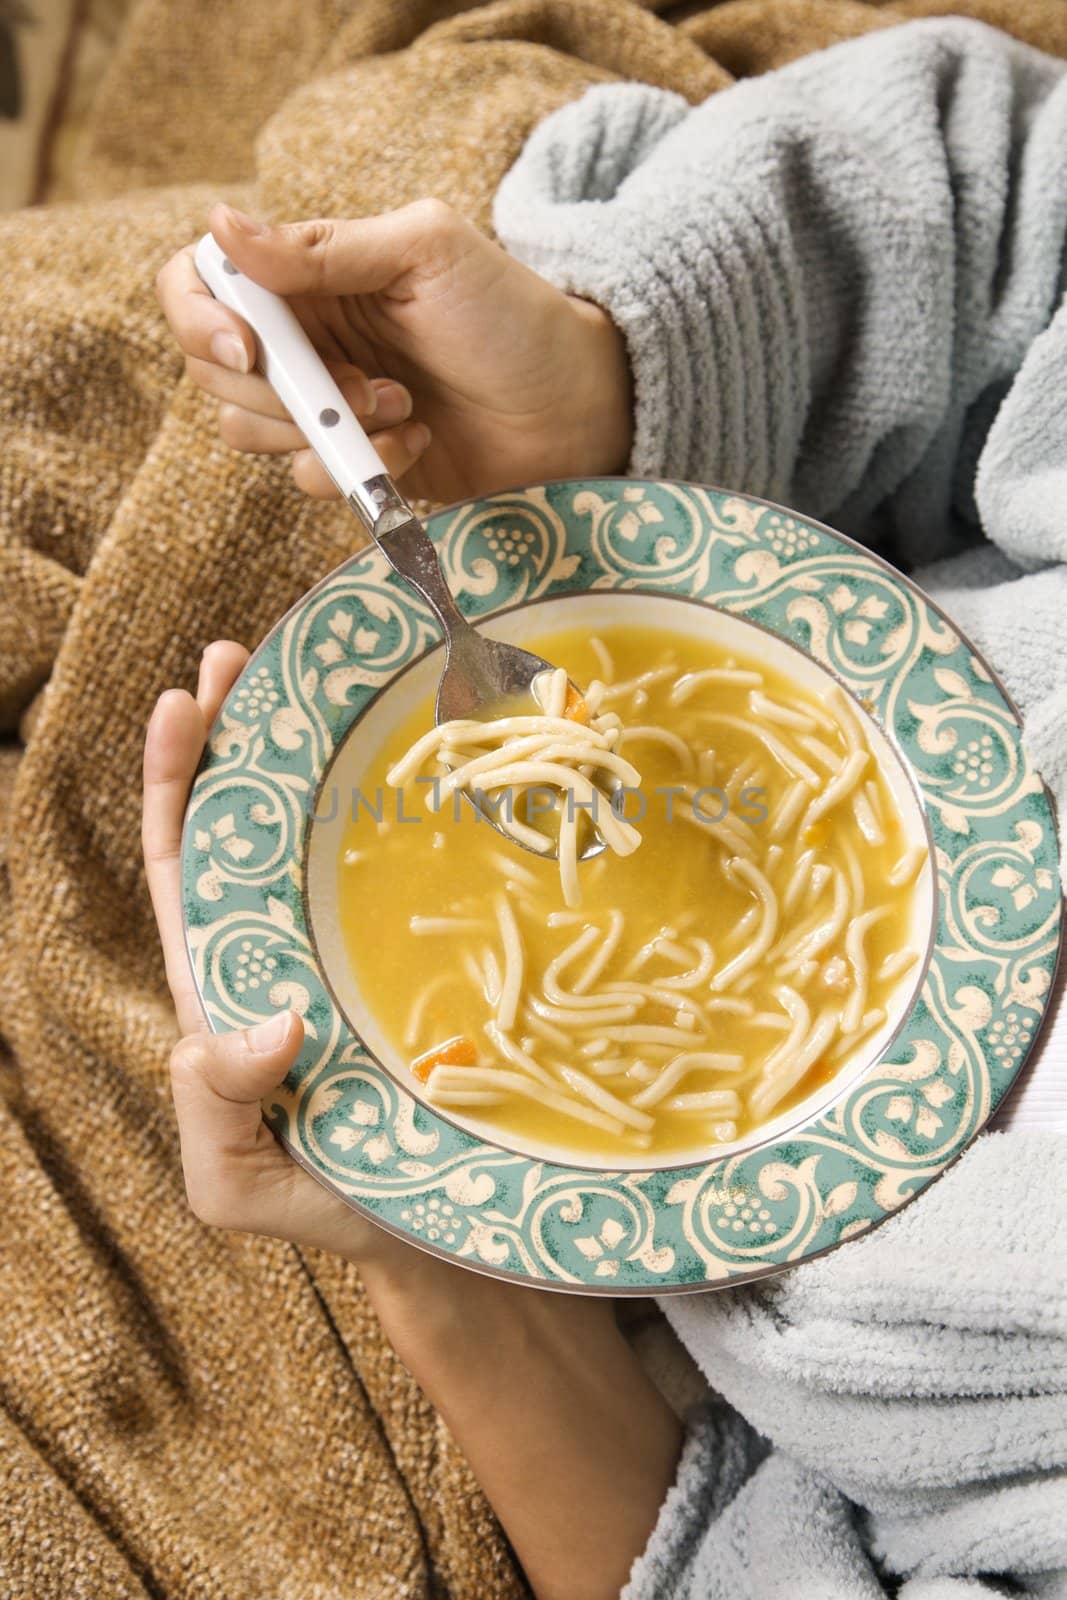 Bowl of chicken noodle soup held in Caucasian/Hispanic hands.